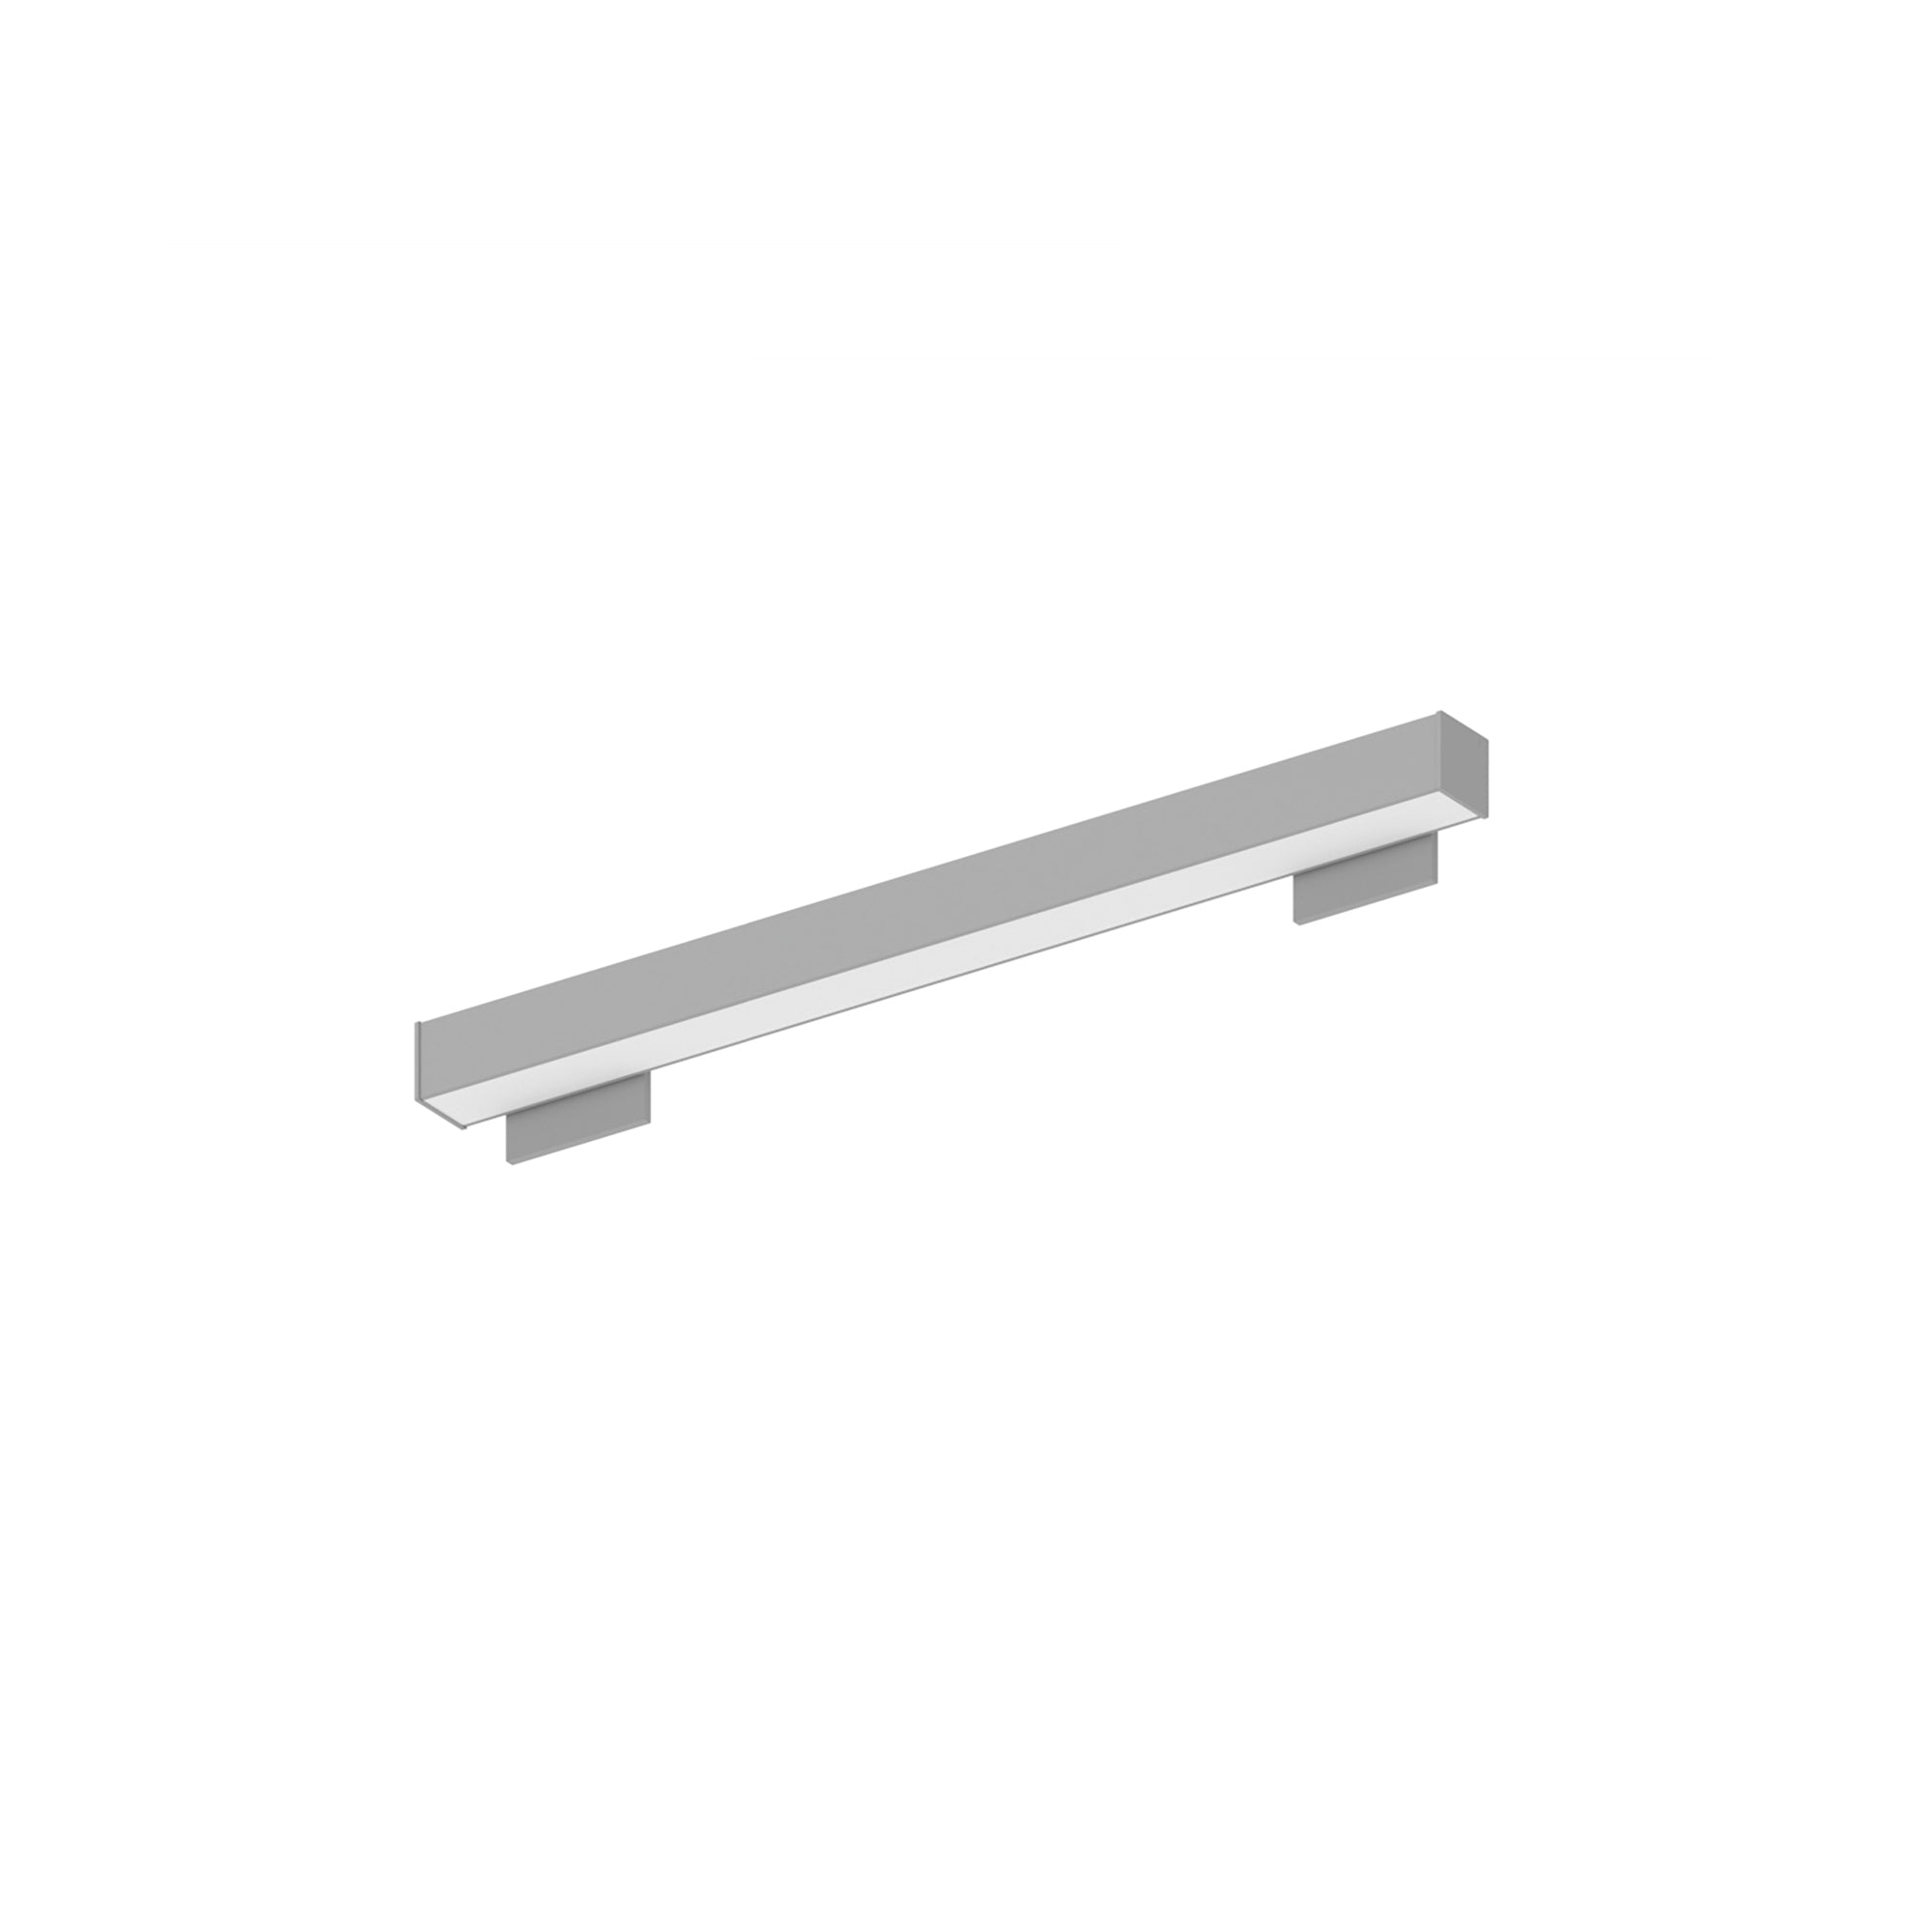 Nora Lighting NWLIN-21035A/L4-R4 - Linear - 2' L-Line LED Wall Mount Linear, 2100lm / 3500K, 4 Inchx4 Inch Left Plate & 4 Inchx4 Inch Right Plate, Aluminum Finish